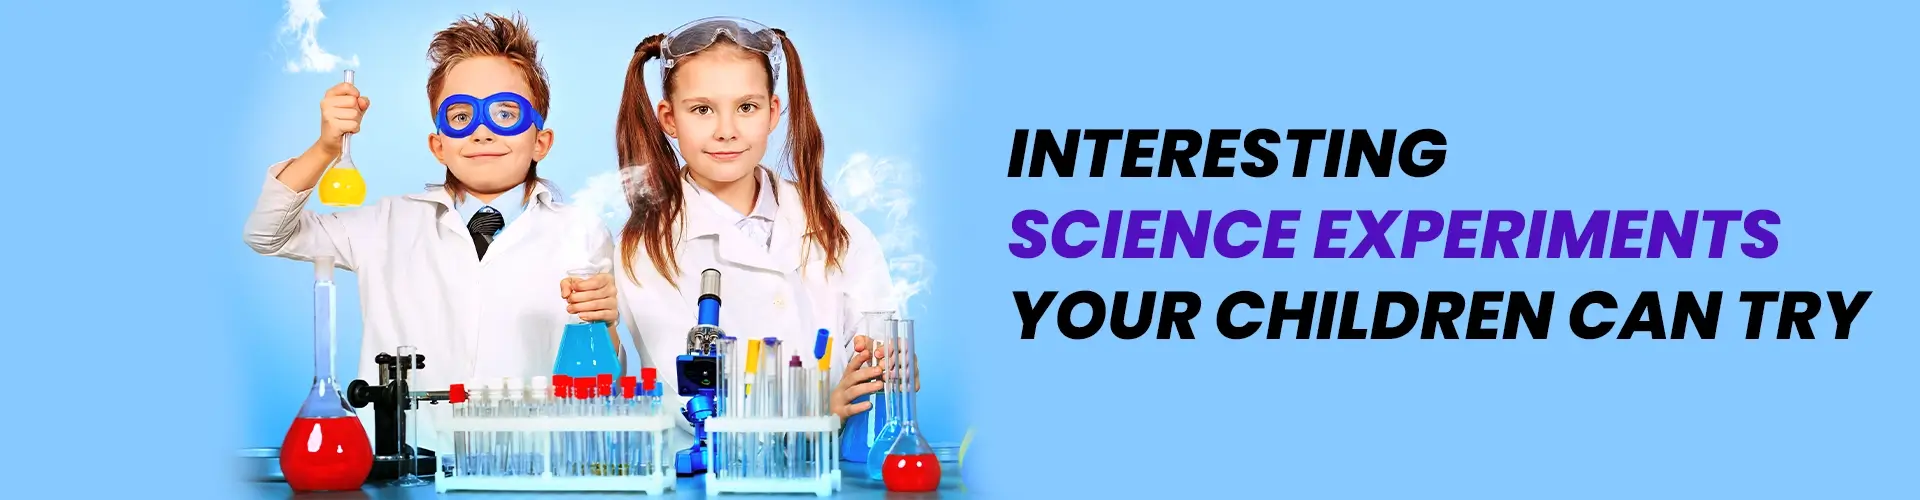 Interesting Science Experiments Your Children Can Try